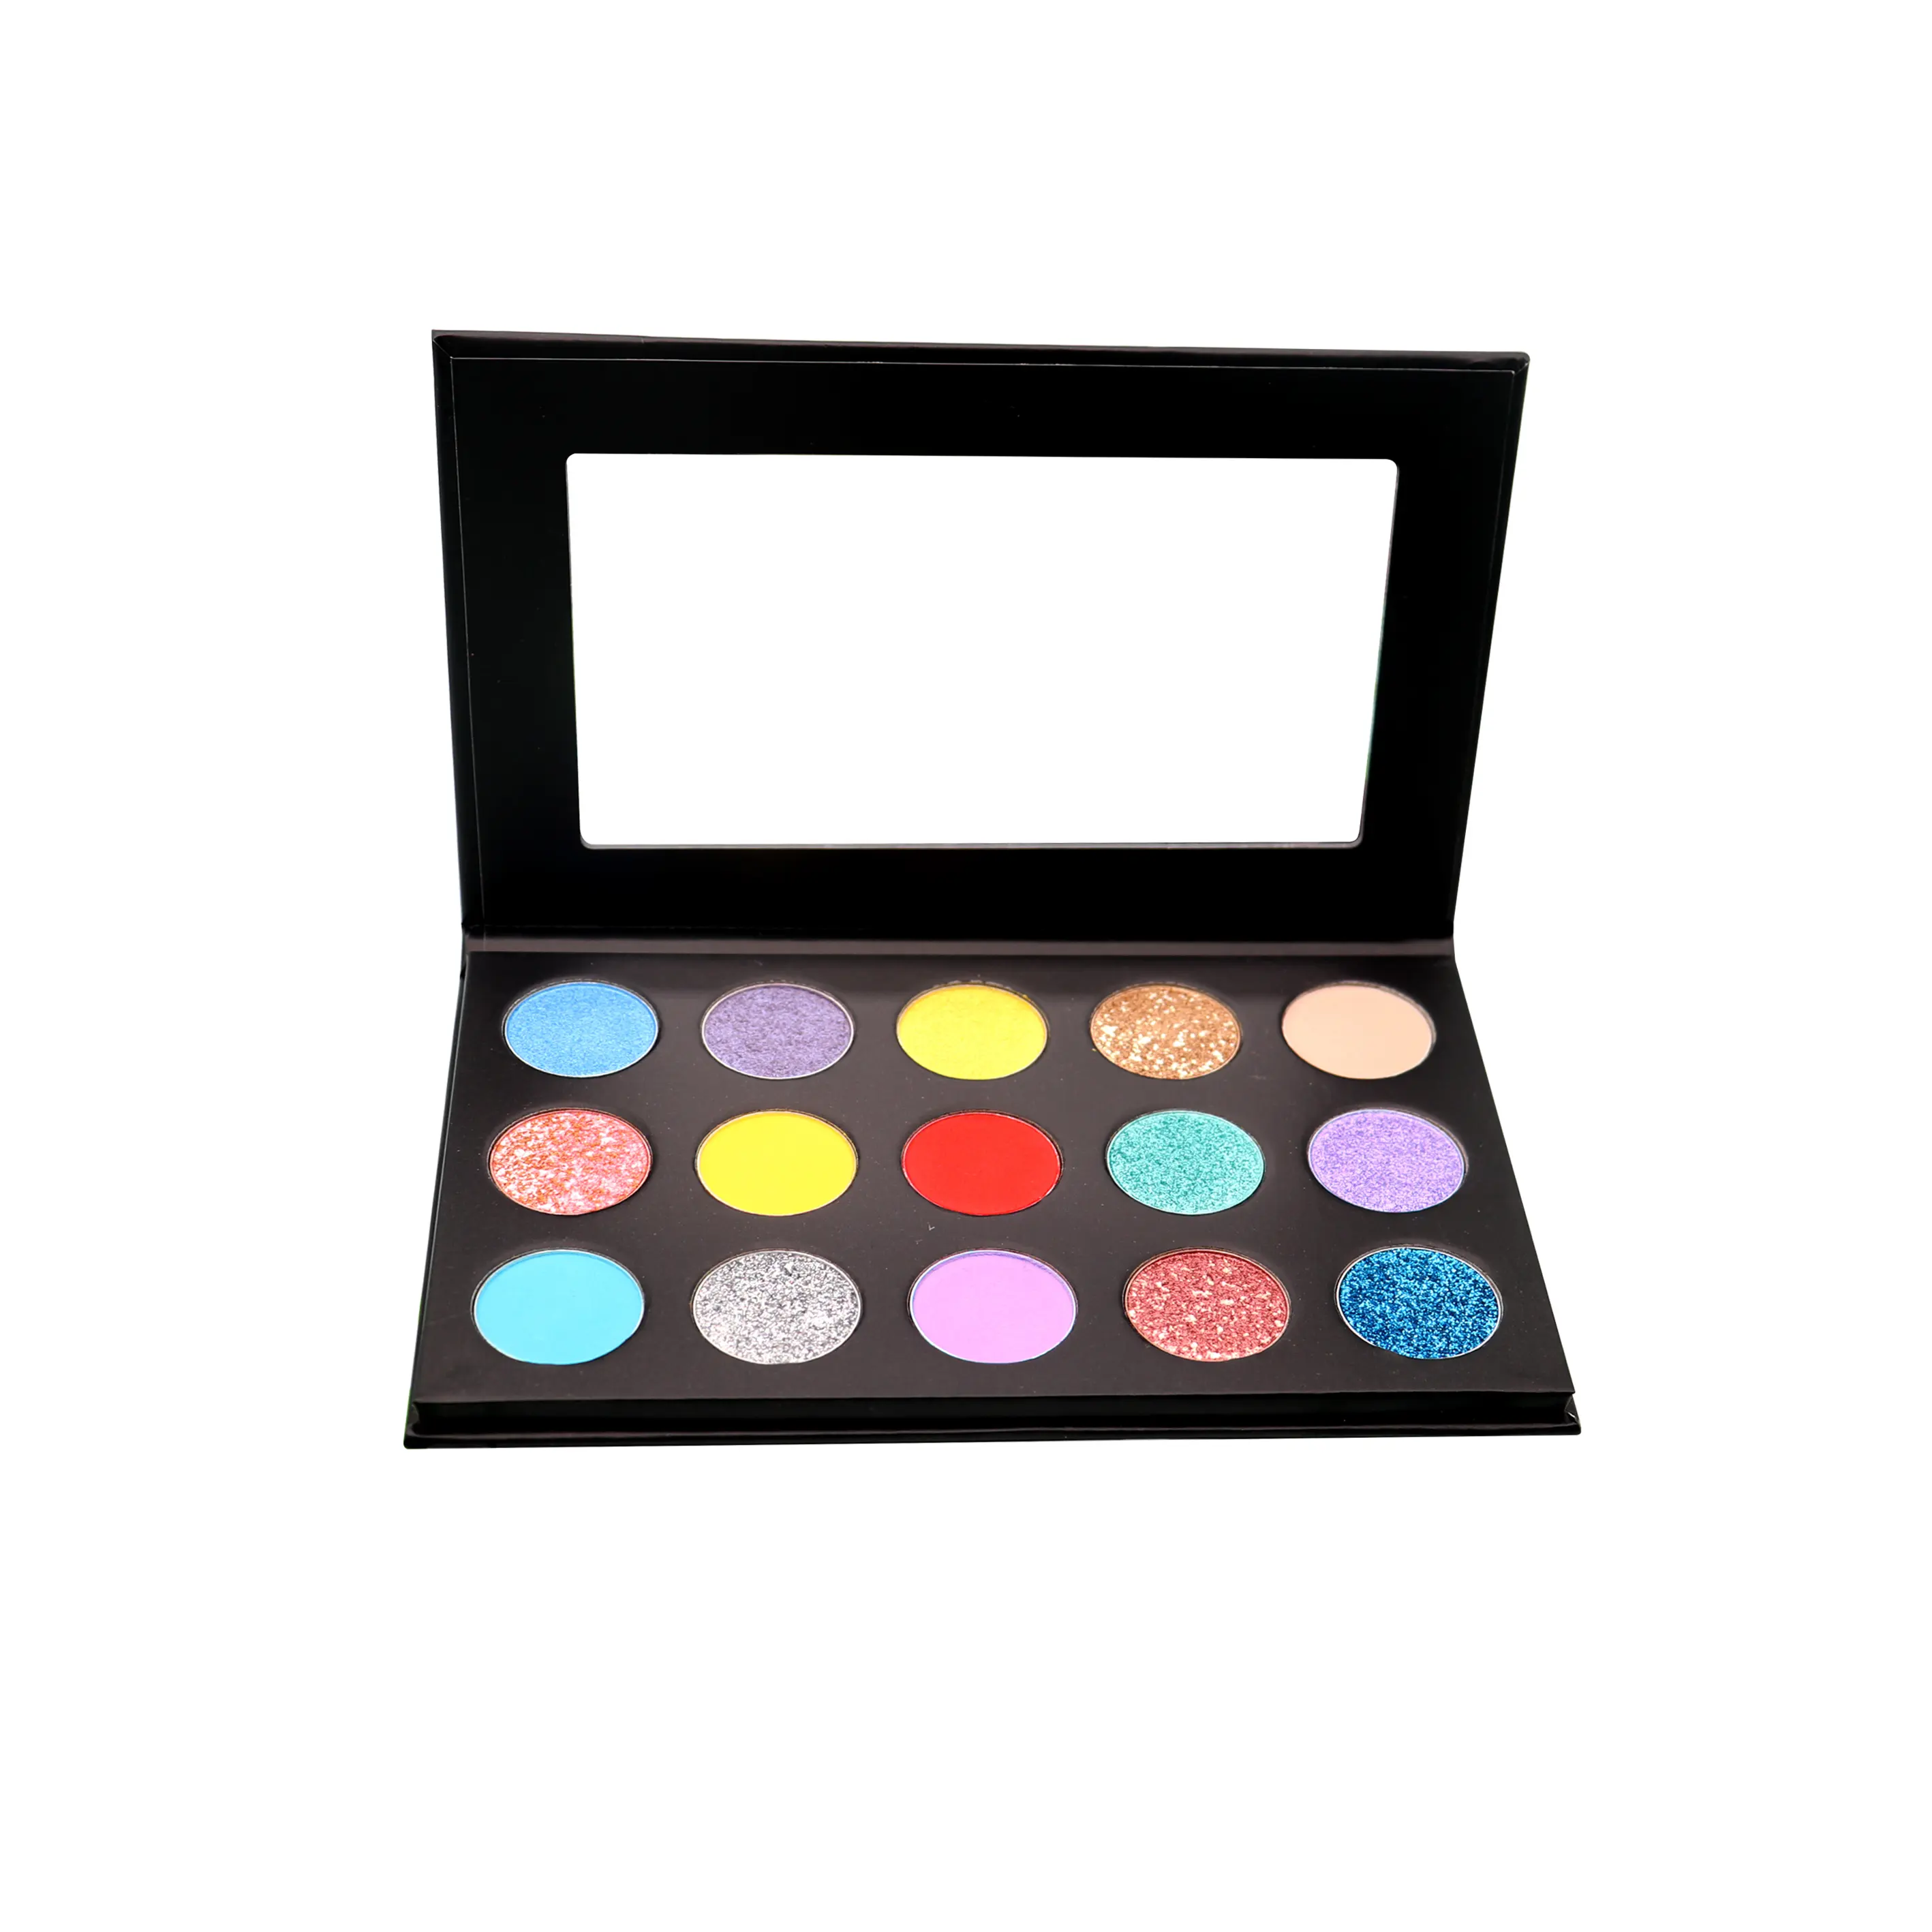 Newest wholesale 4 color eye shadow 35 3 in 1 eyeshadow With The Best Quality